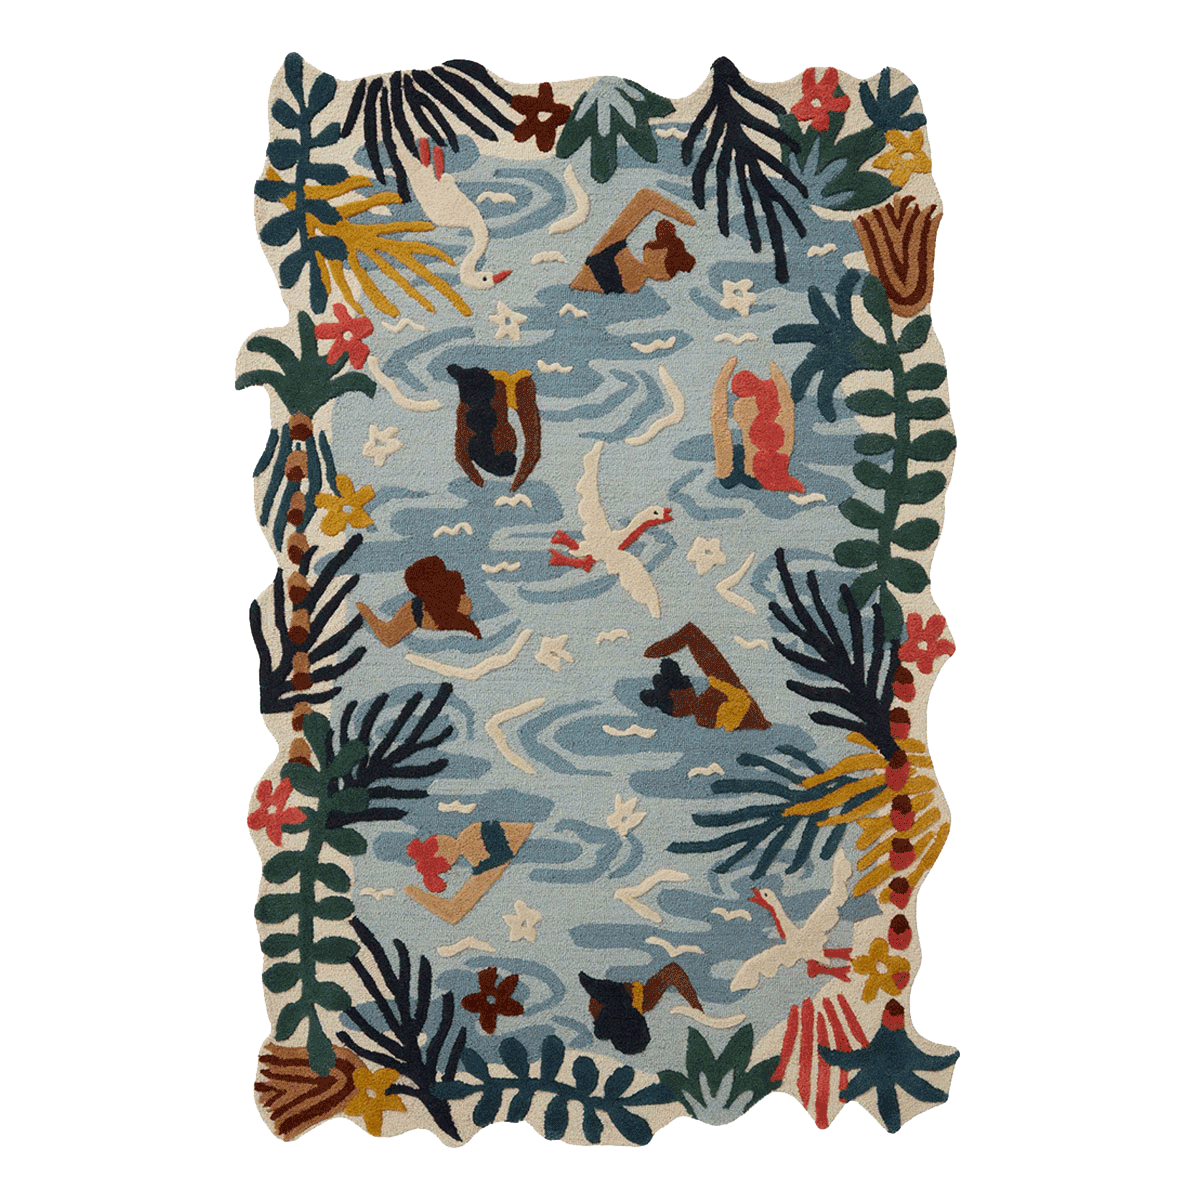 rug featuring designs of people swimming in water and birds flying with a border on the rug of palm trees and flowers